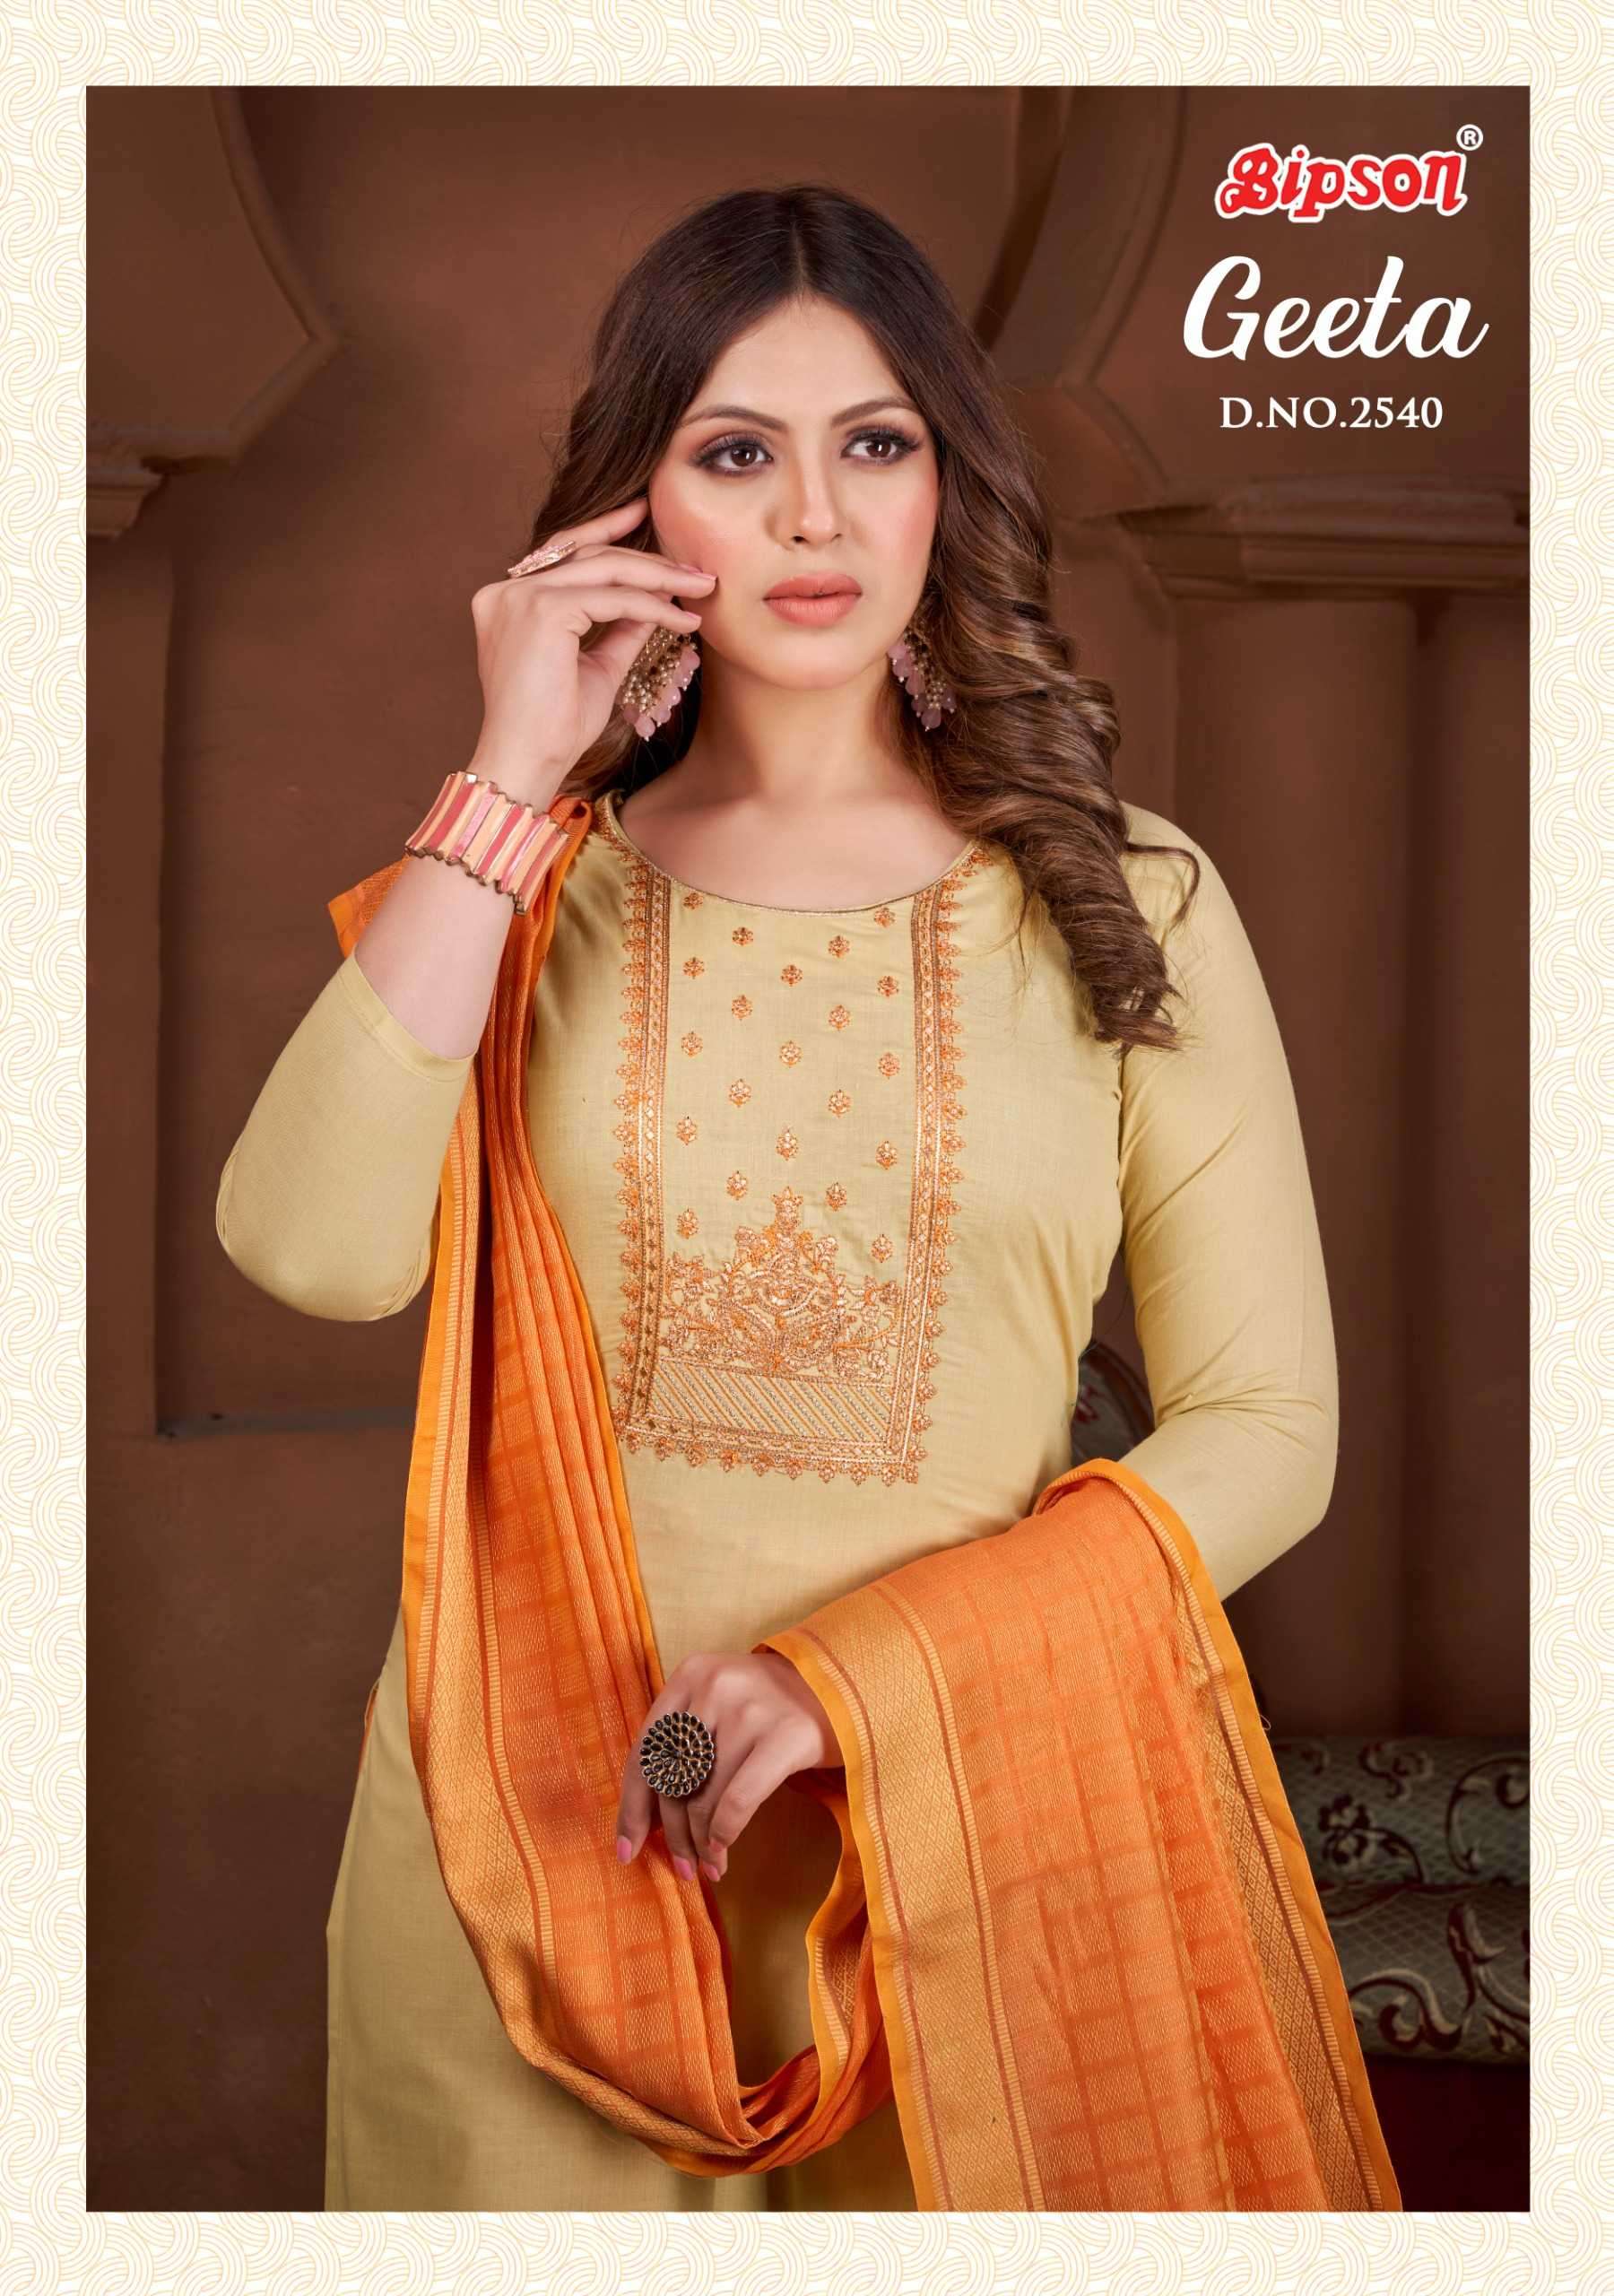 bipson geeta 2540 Pure Cotton Dyed With Kashmiri embroidery work suit 